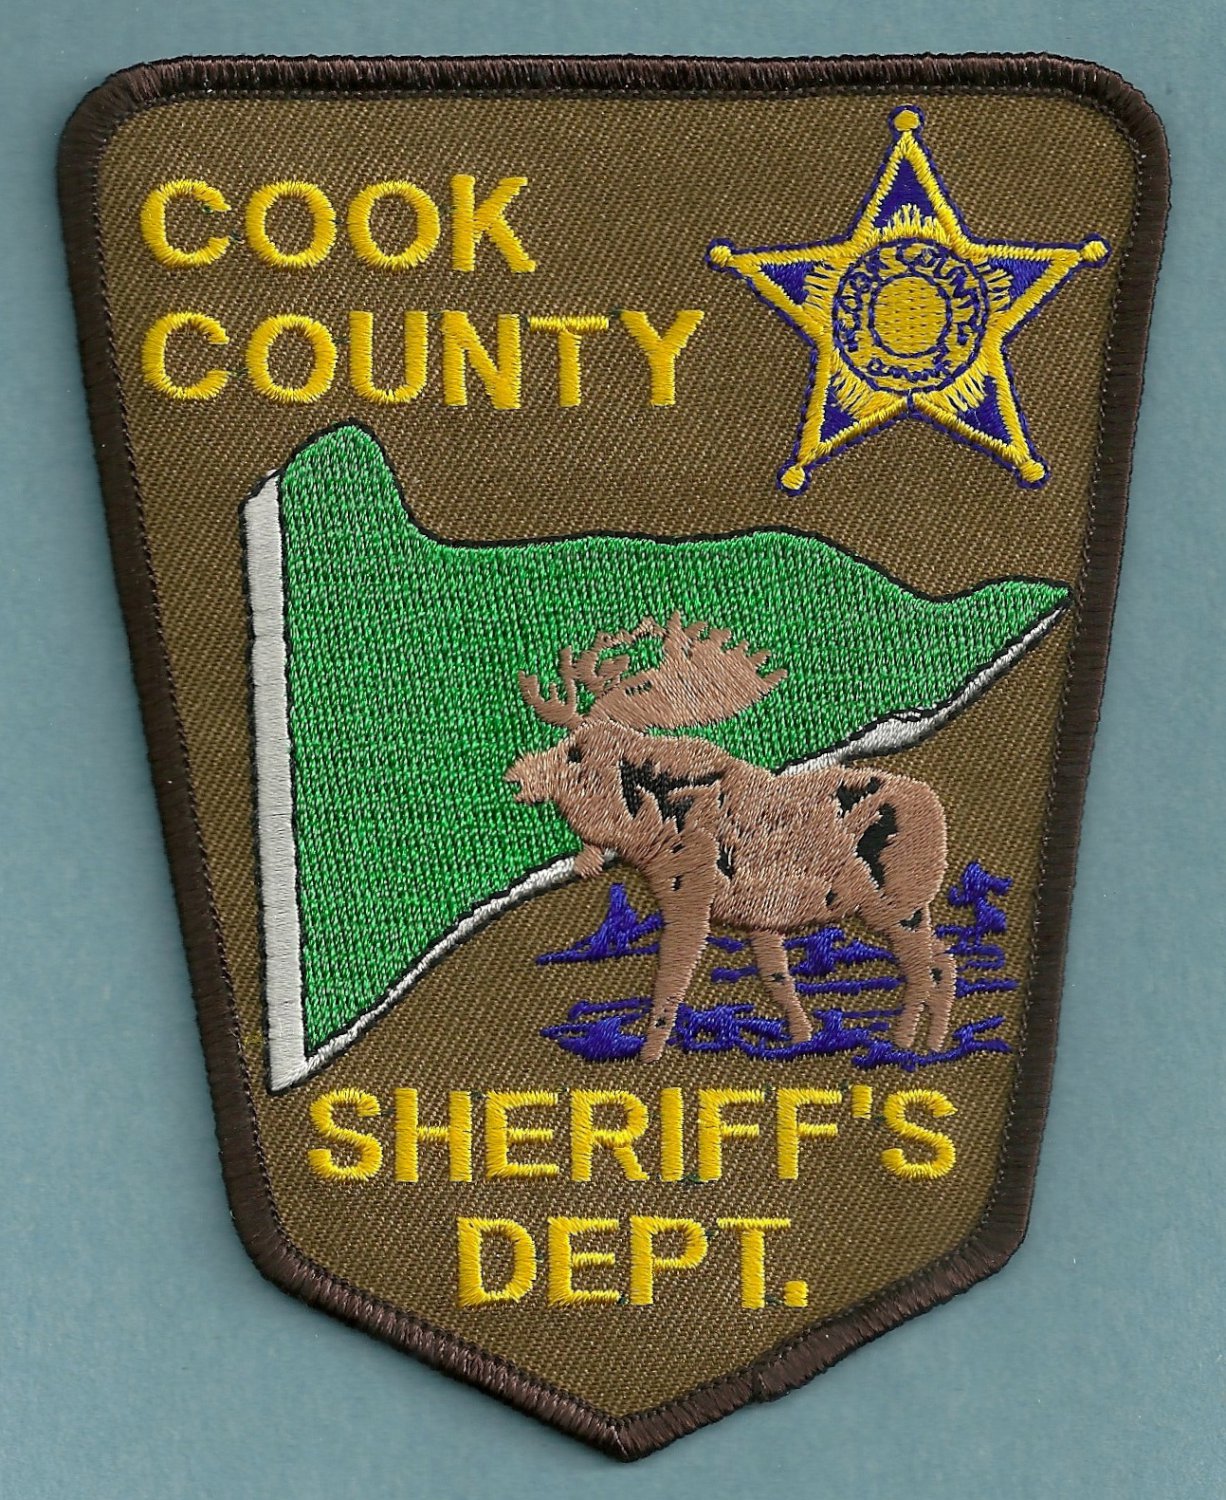 Cook County Sheriff Patch from Minnesota in mint condition. 